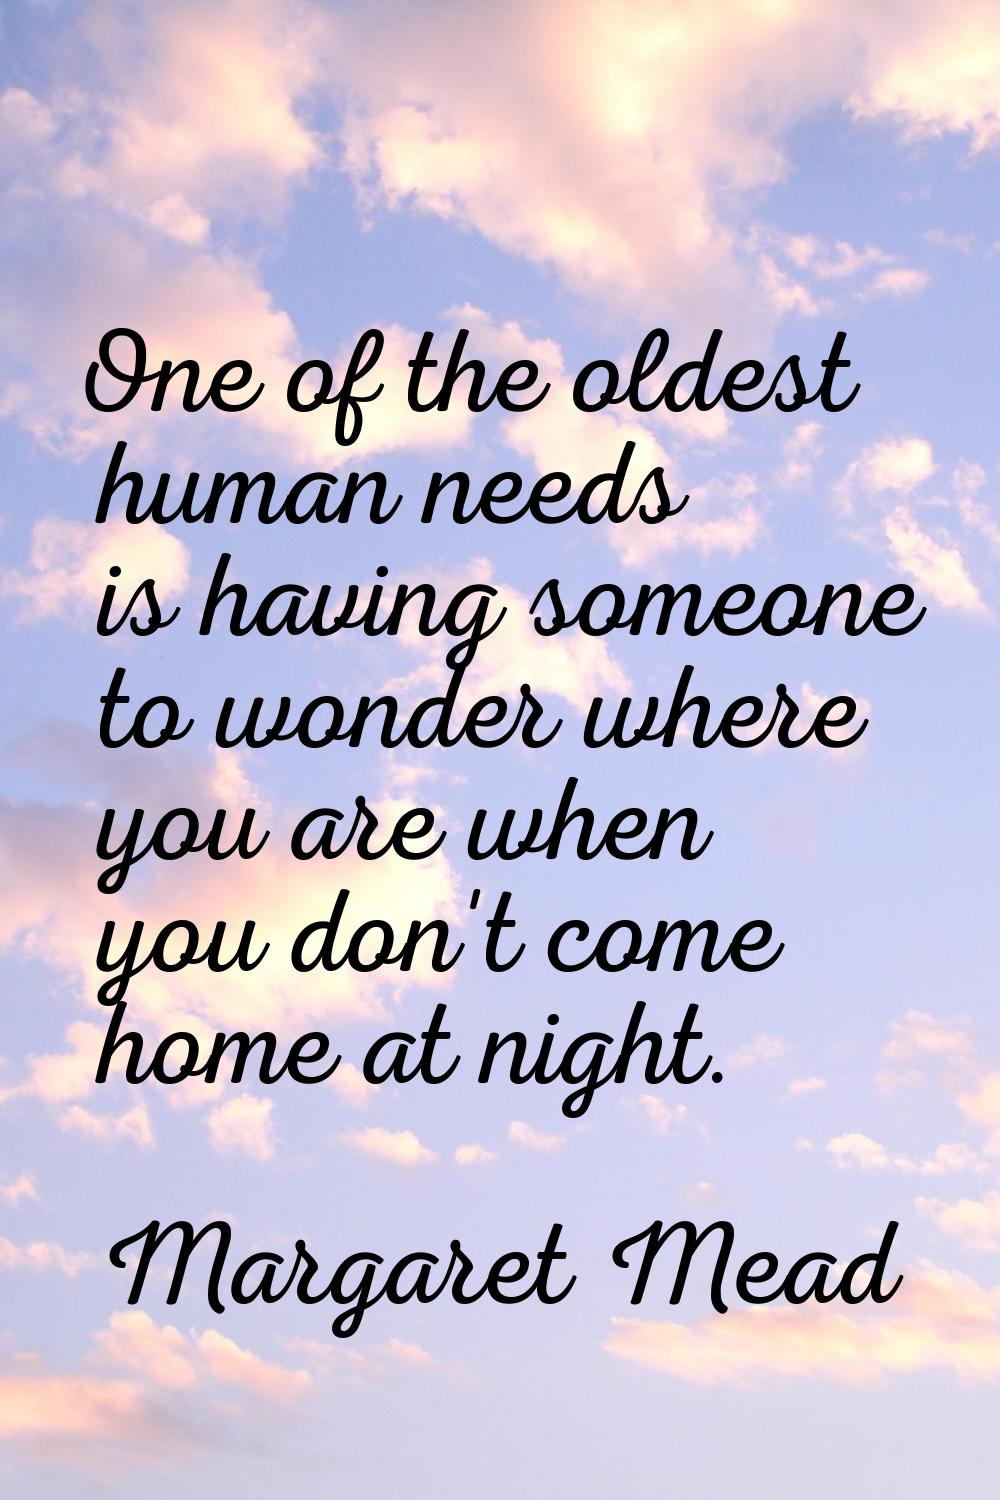 One of the oldest human needs is having someone to wonder where you are when you don't come home at